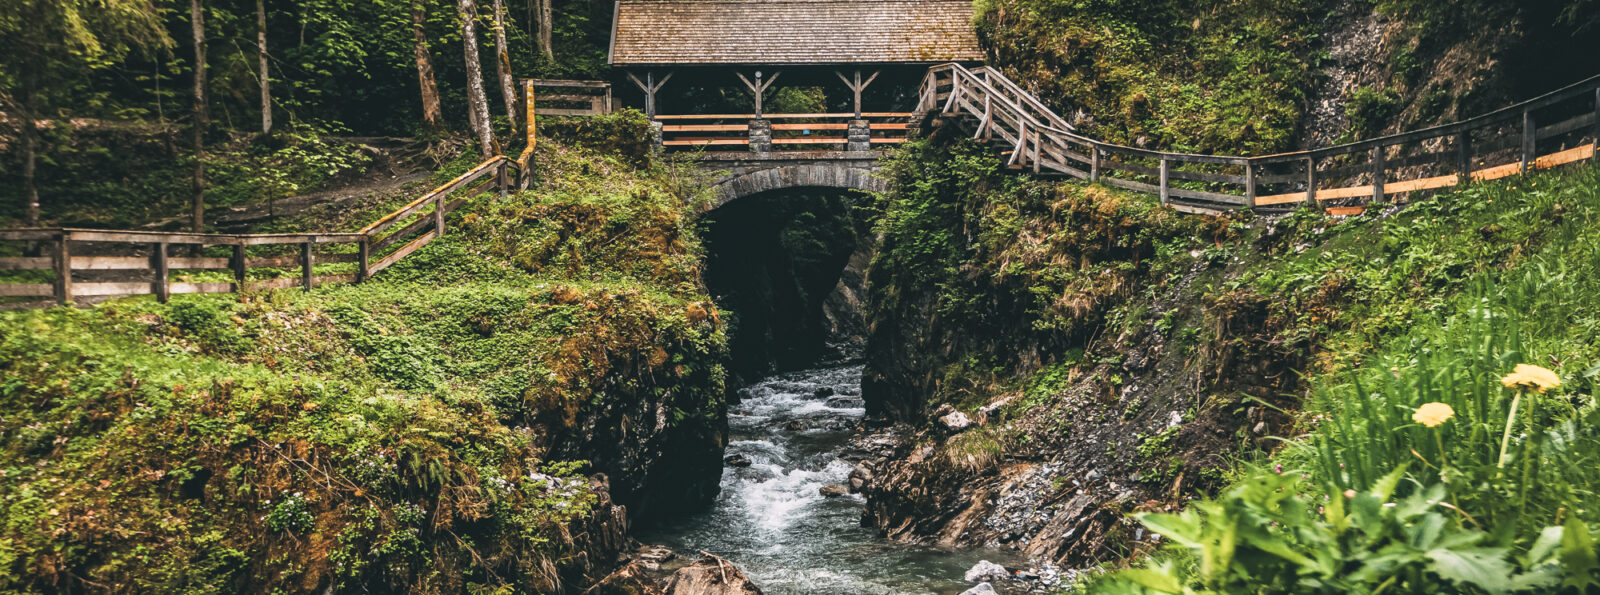 beautiful picture of the entrance of sigmund thun gorge kaprun